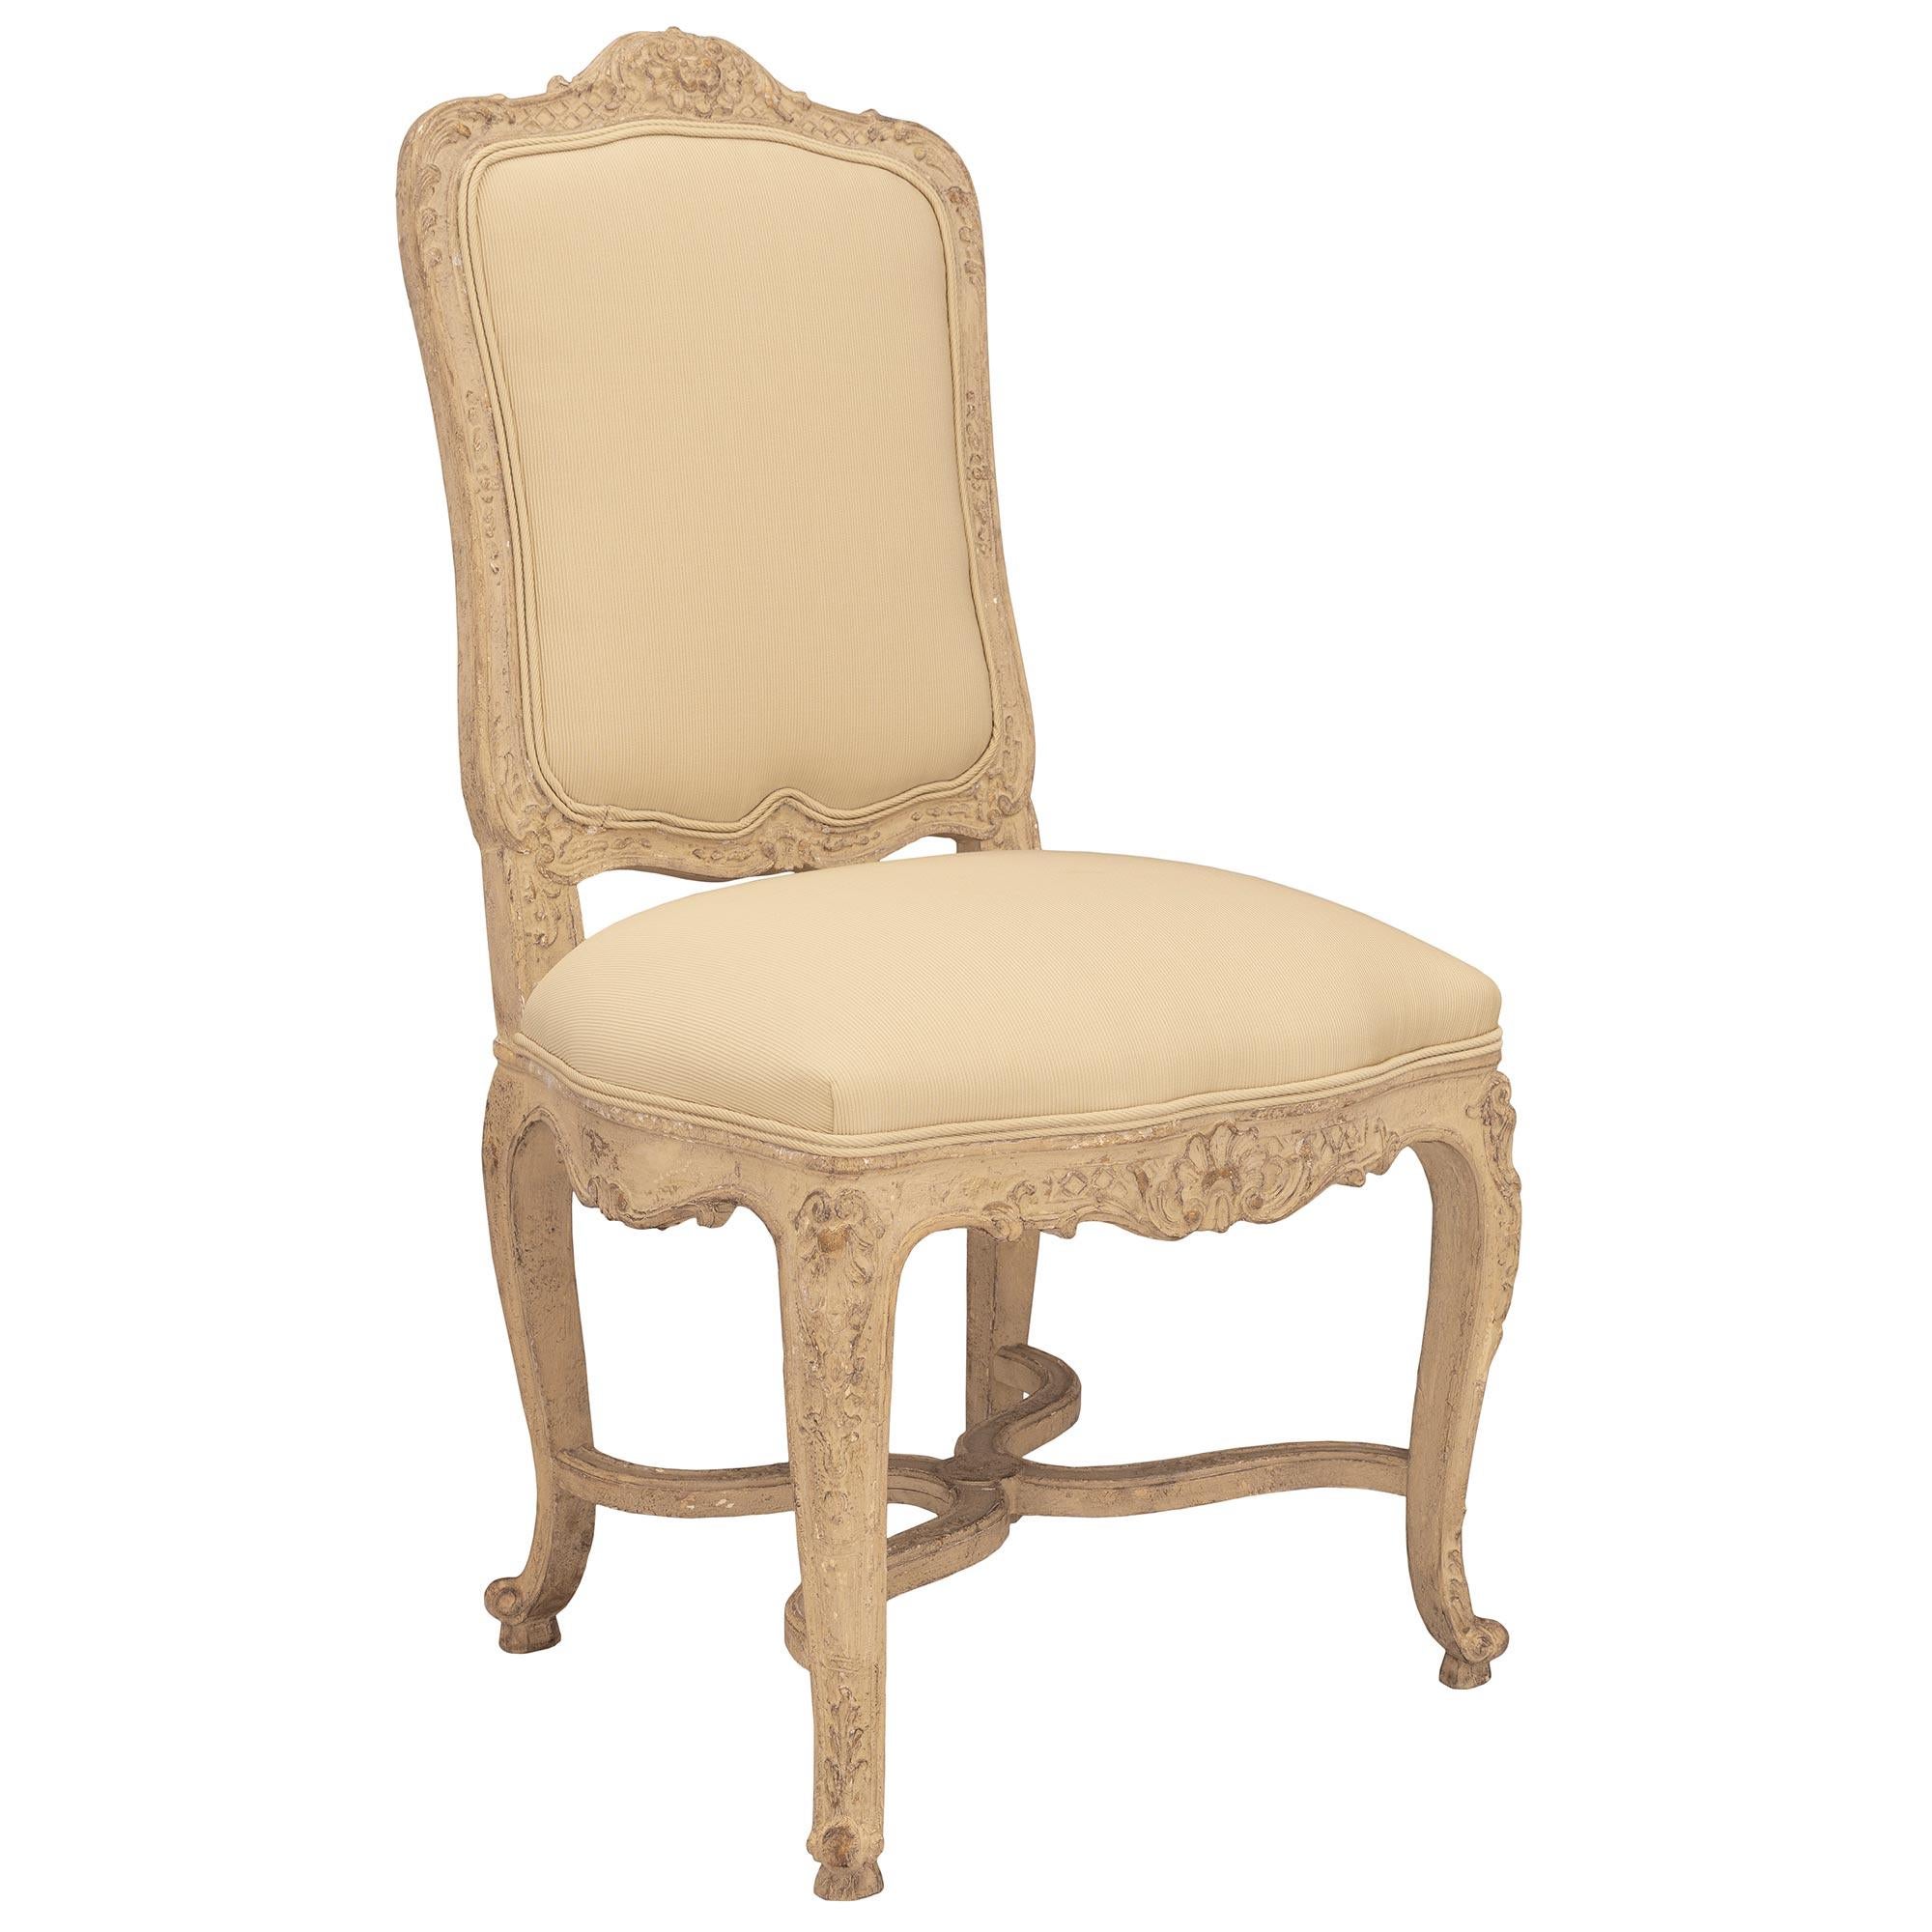 A charming and very high quality set of eight French turn-of-the-century Louis XV st. patinated dining chairs. Each chair is raised by elegant cabriole legs with fine scrolled feet, richly carved acanthus leaves and corner foliate designs. Each leg